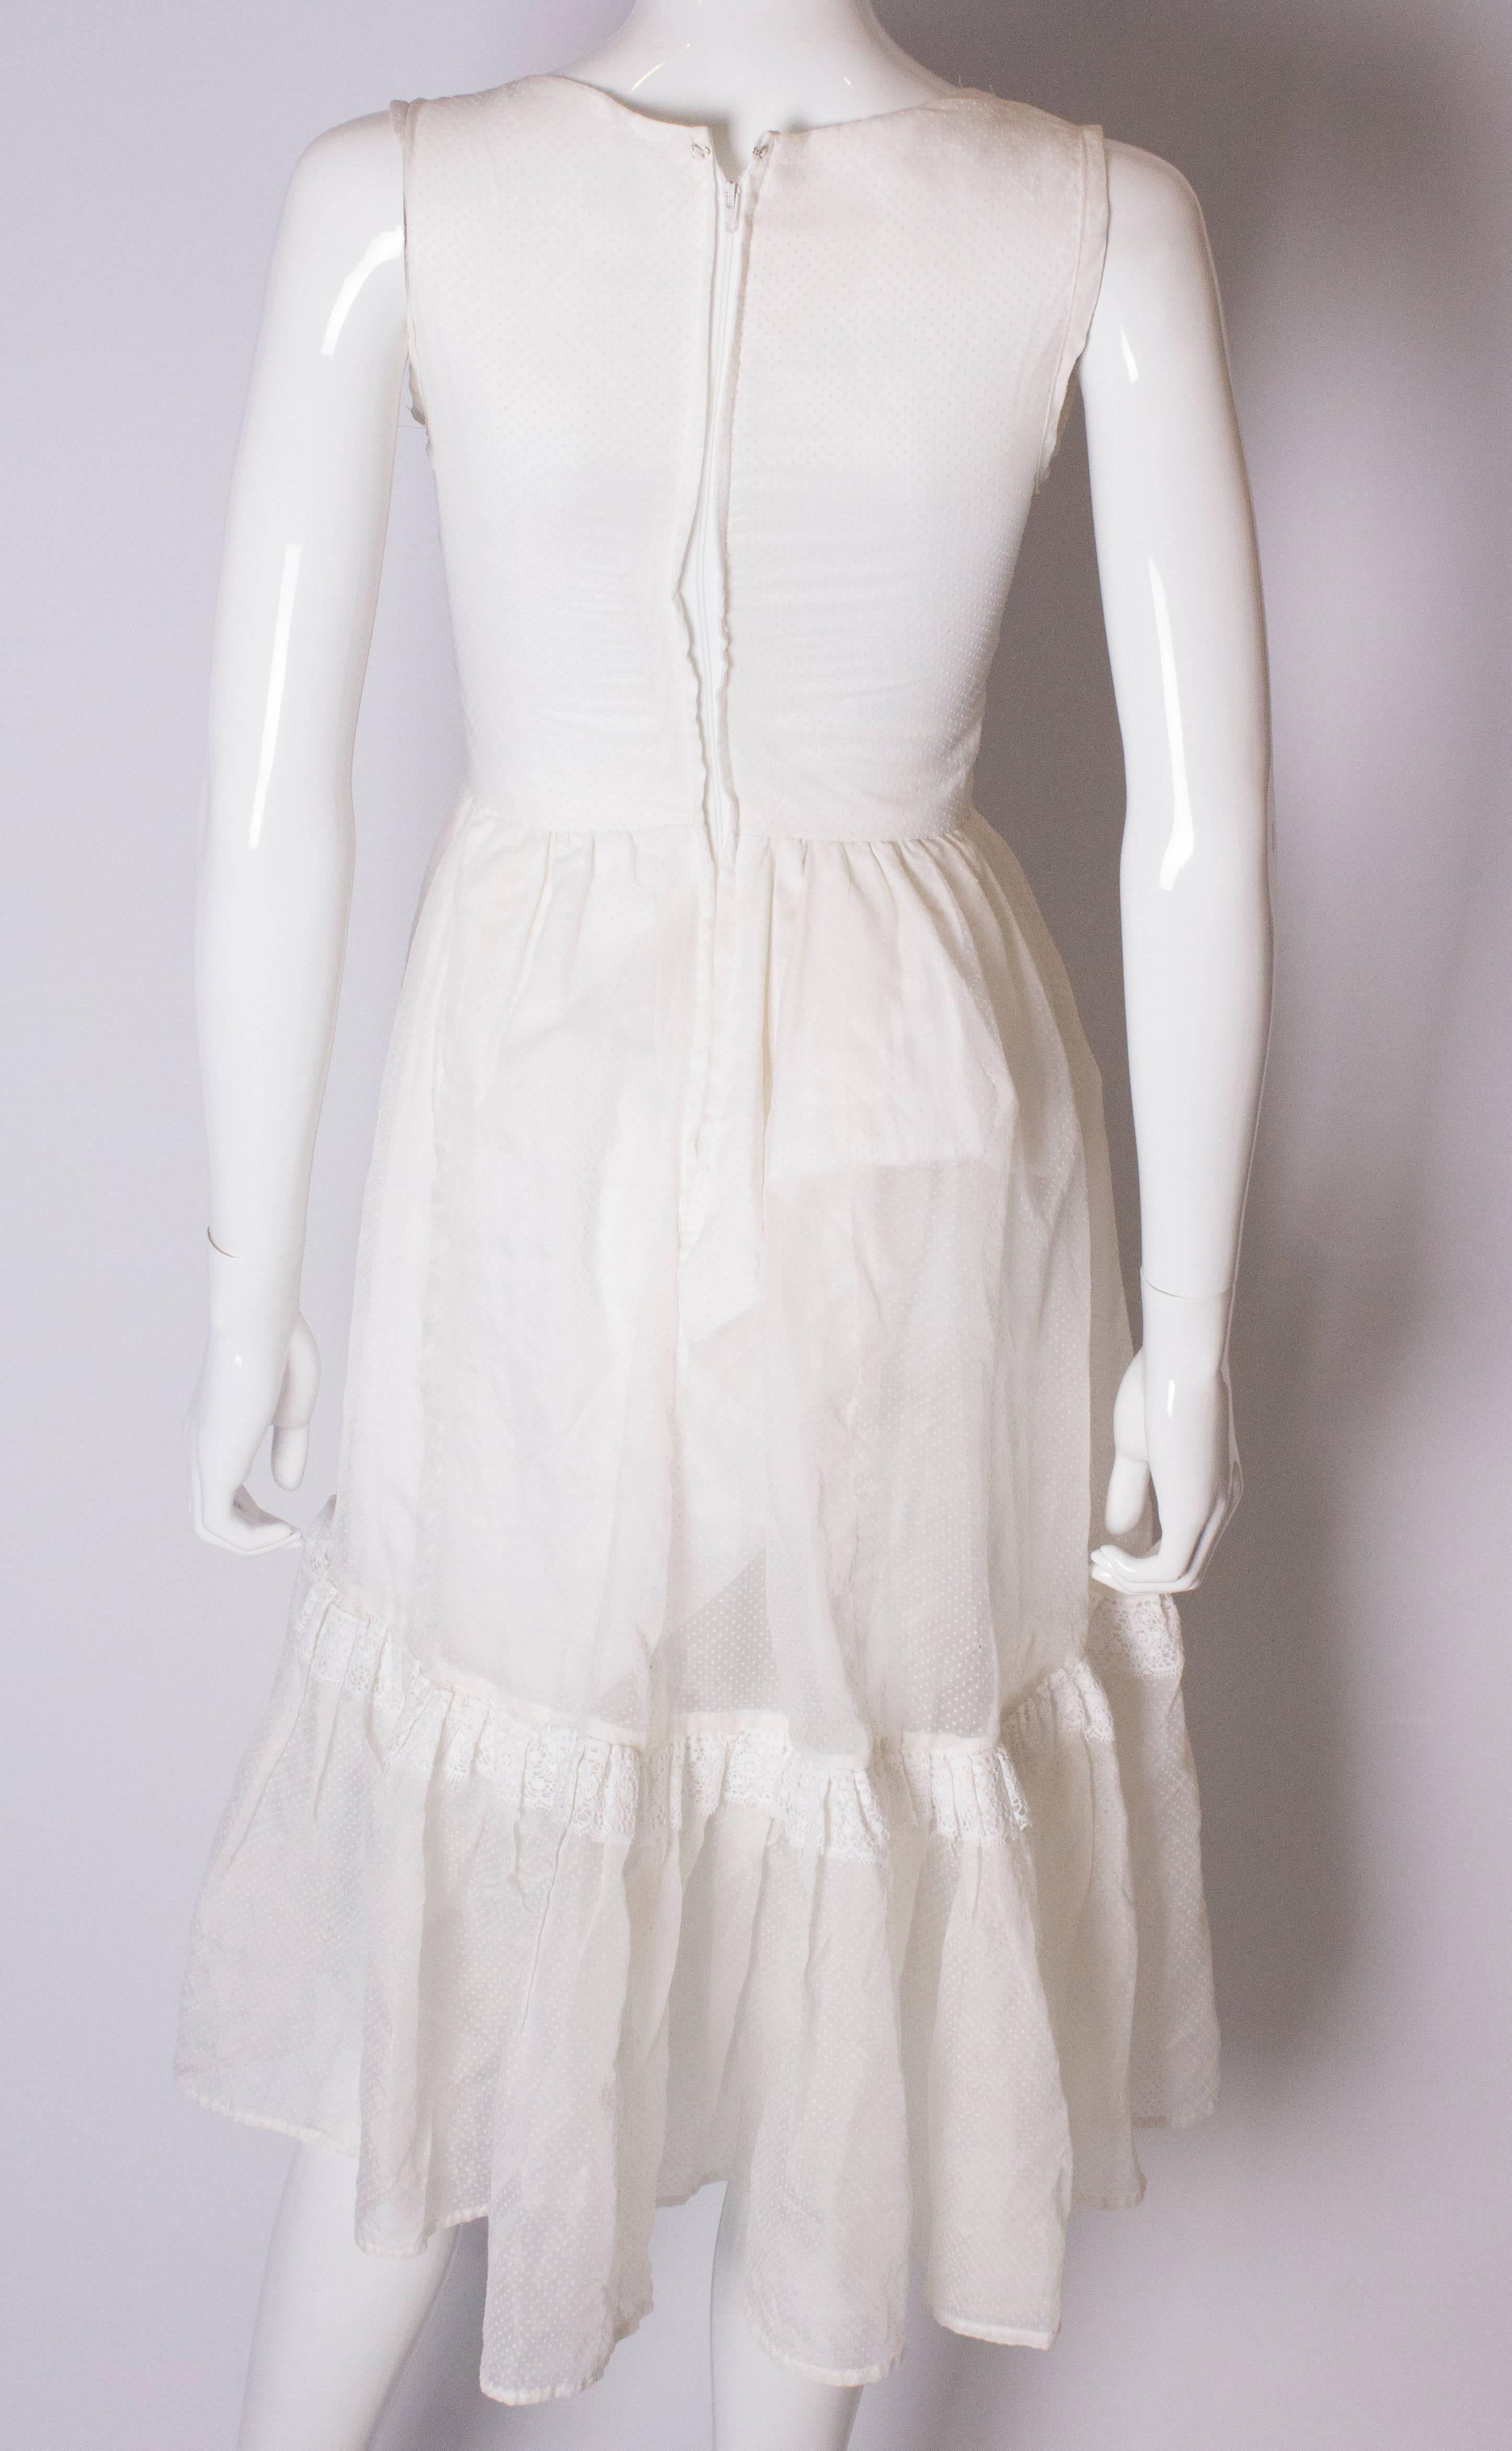 Women's A vintage 1950s White Spotted and Lace summer Dress For Sale